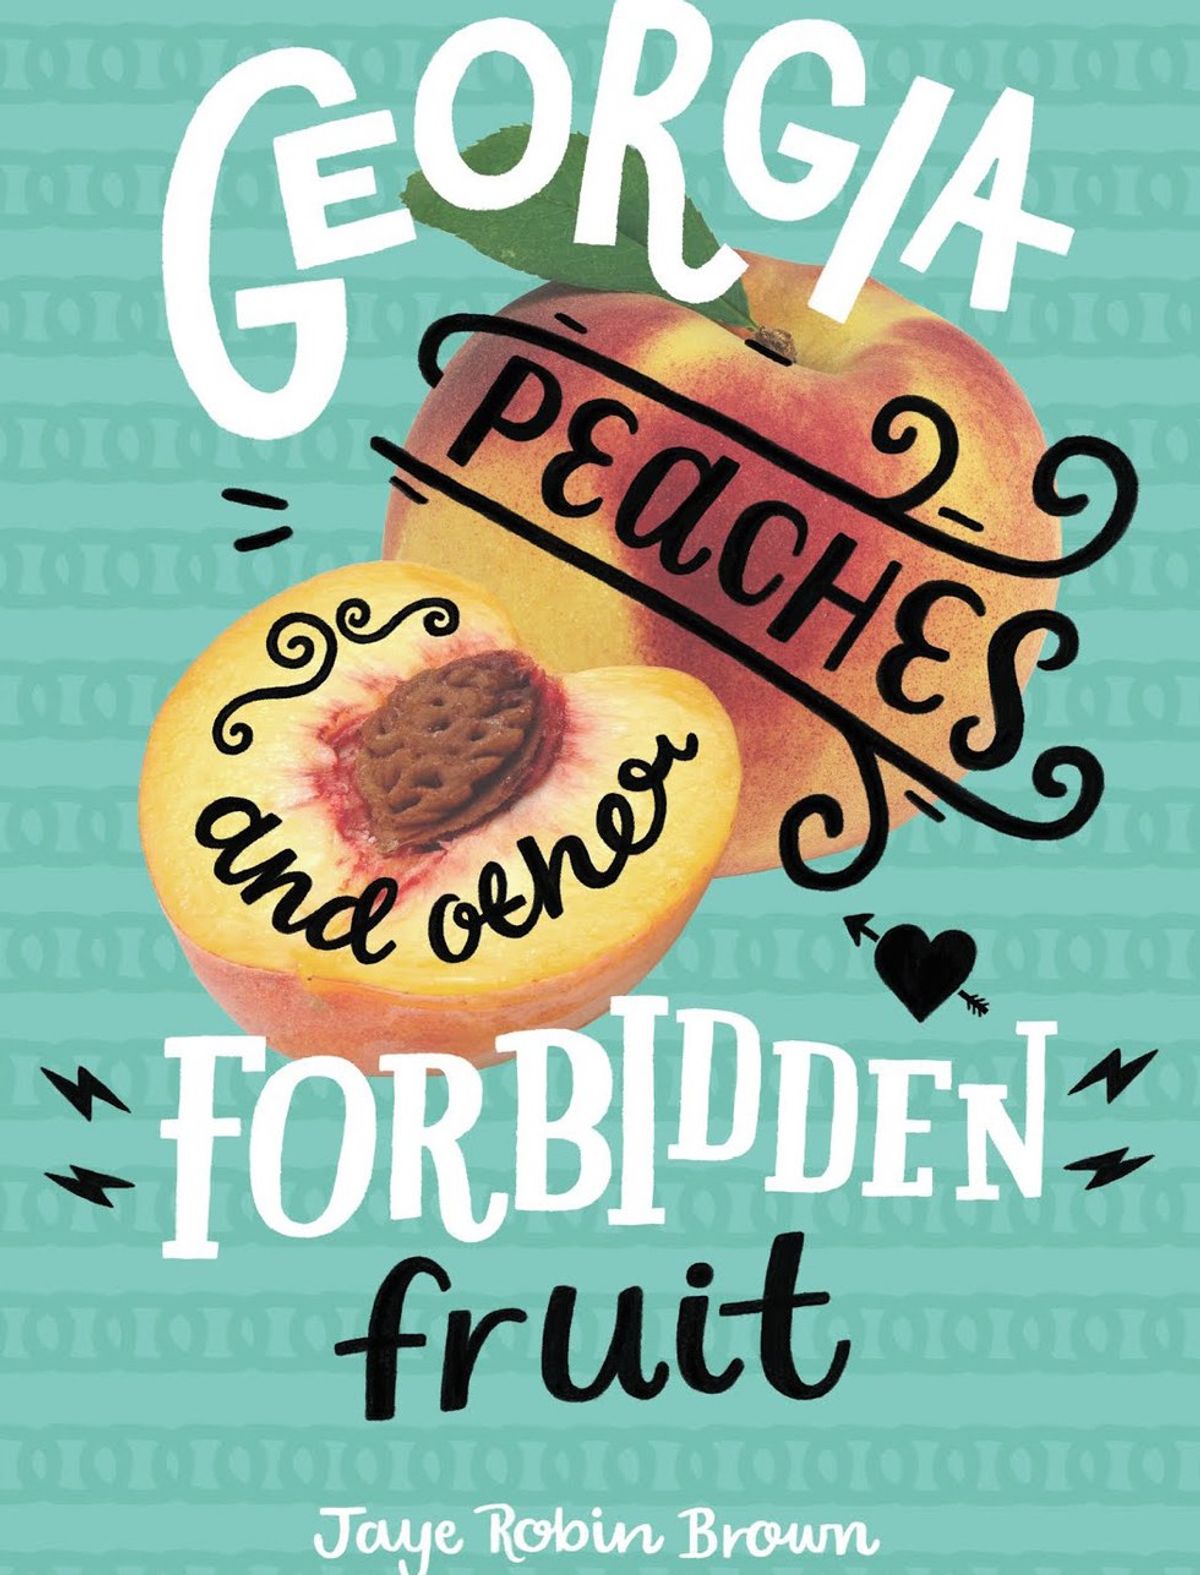 LGBTQ Book Review #1: "Georgia Peaches and Other Forbidden Fruit"